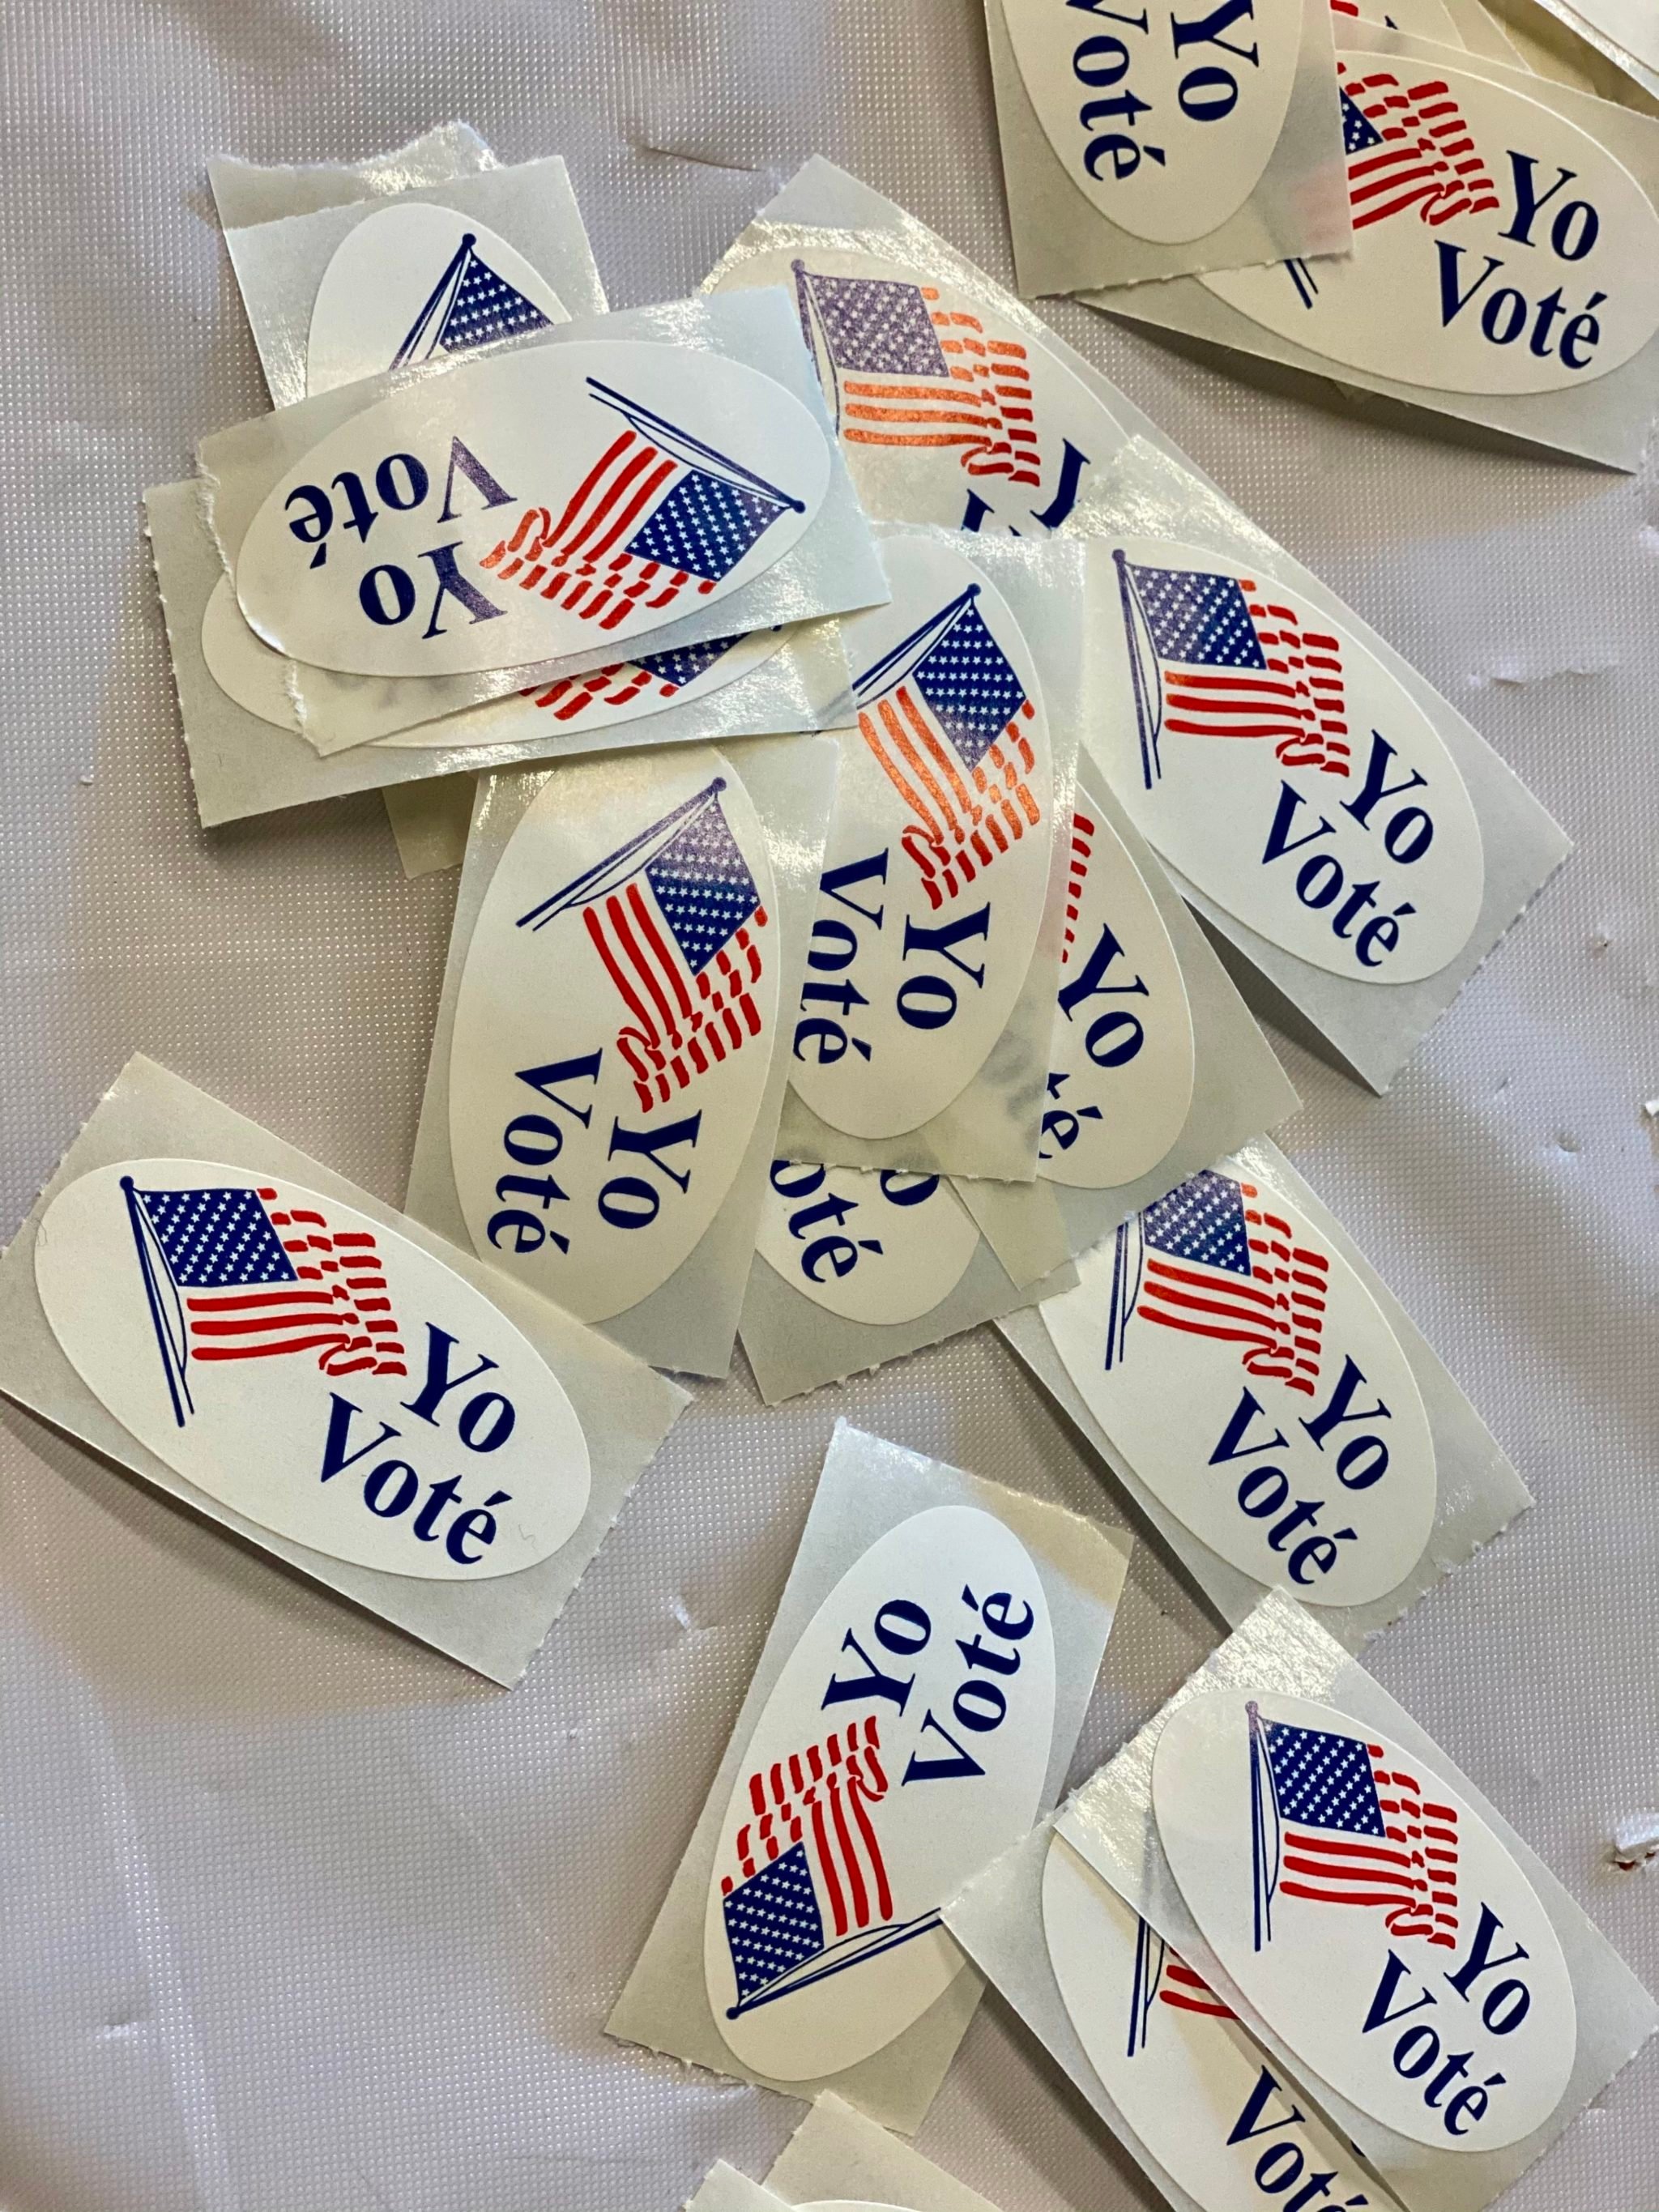 Photos: Voting in DC, Election Day 2020